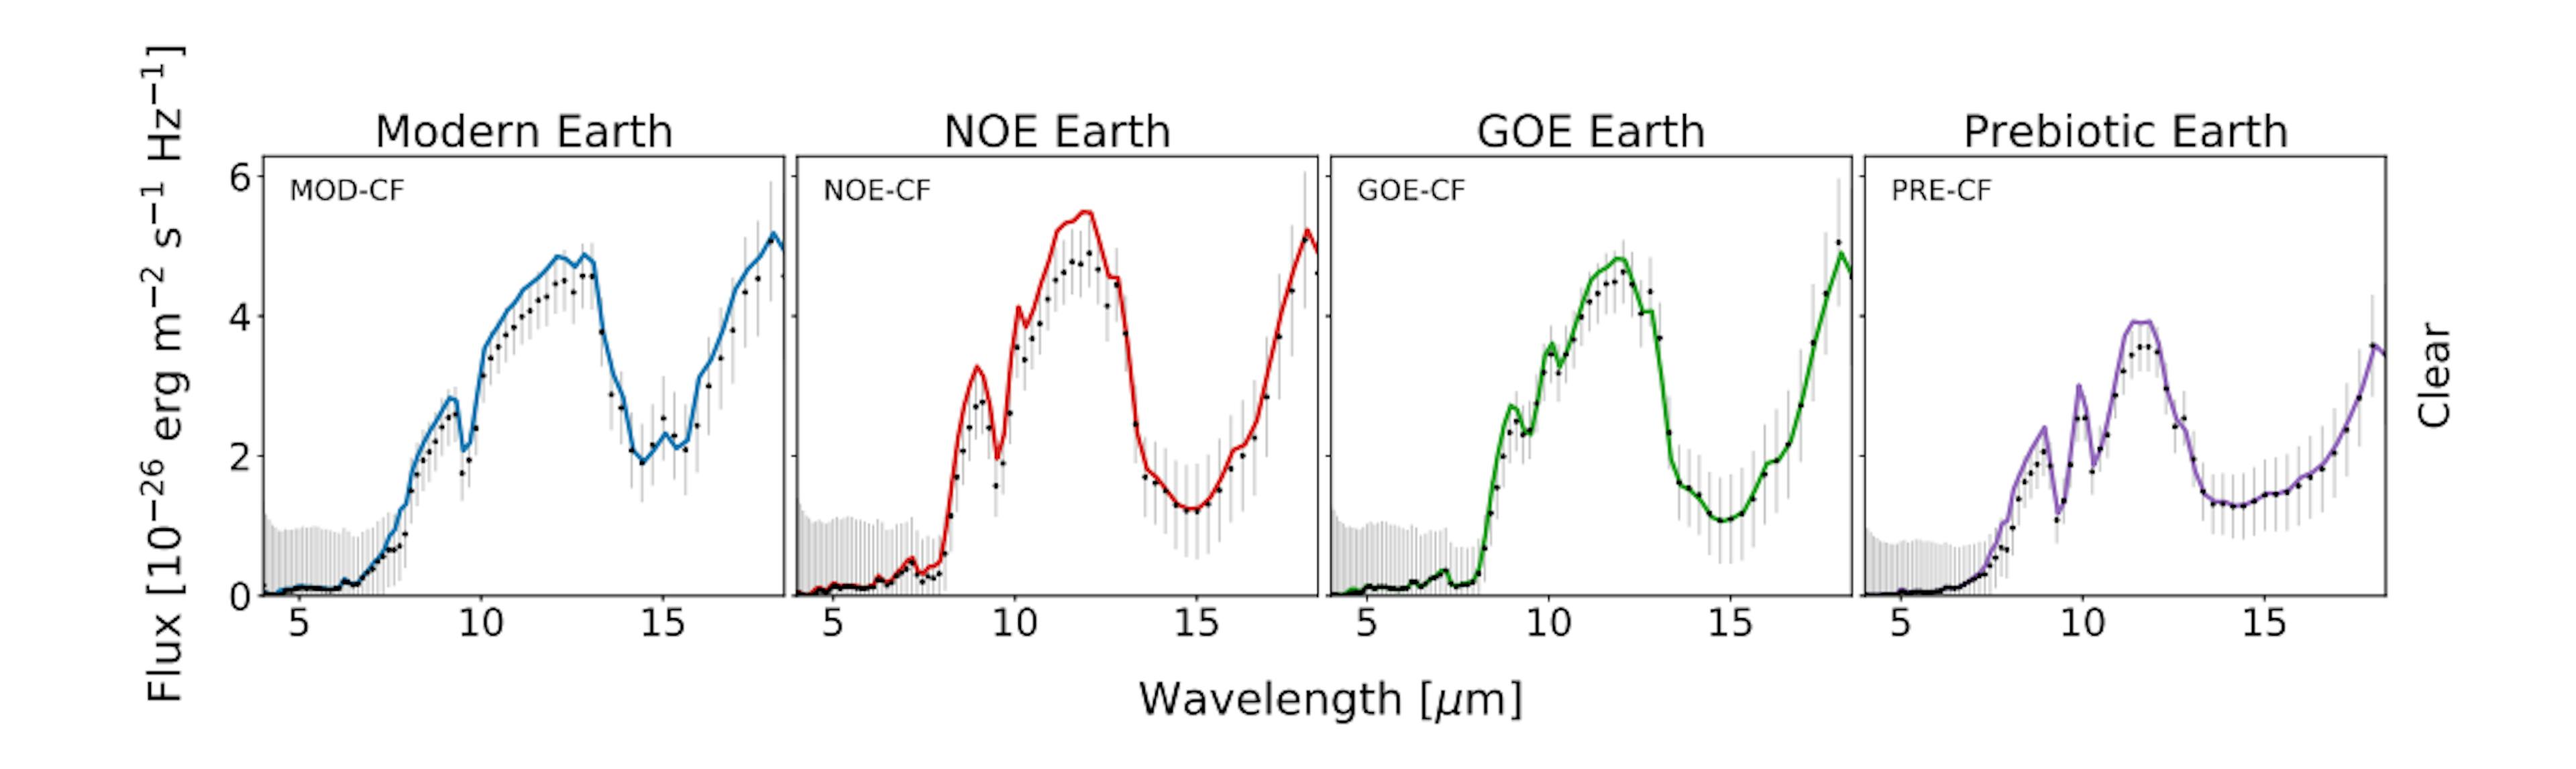 Fig. 9: Comparison between the R = 50 MIR spectra of the four clear-sky epochs (MOD-CF, NOE-CF, GOE-CF, and PRE-CF; solid lines following the color scheme of Table 1) produced with petitRADTRANS with the results from Rugheimer & Kaltenegger (2018) (black dots) assuming the same input parameters (i.e. P-T profile, abundances, planetary dimensions). The error bars indicate the LIFEsim uncertainty assumed for the main grid of retrievals (S/N = 10 at 11.2 µm).